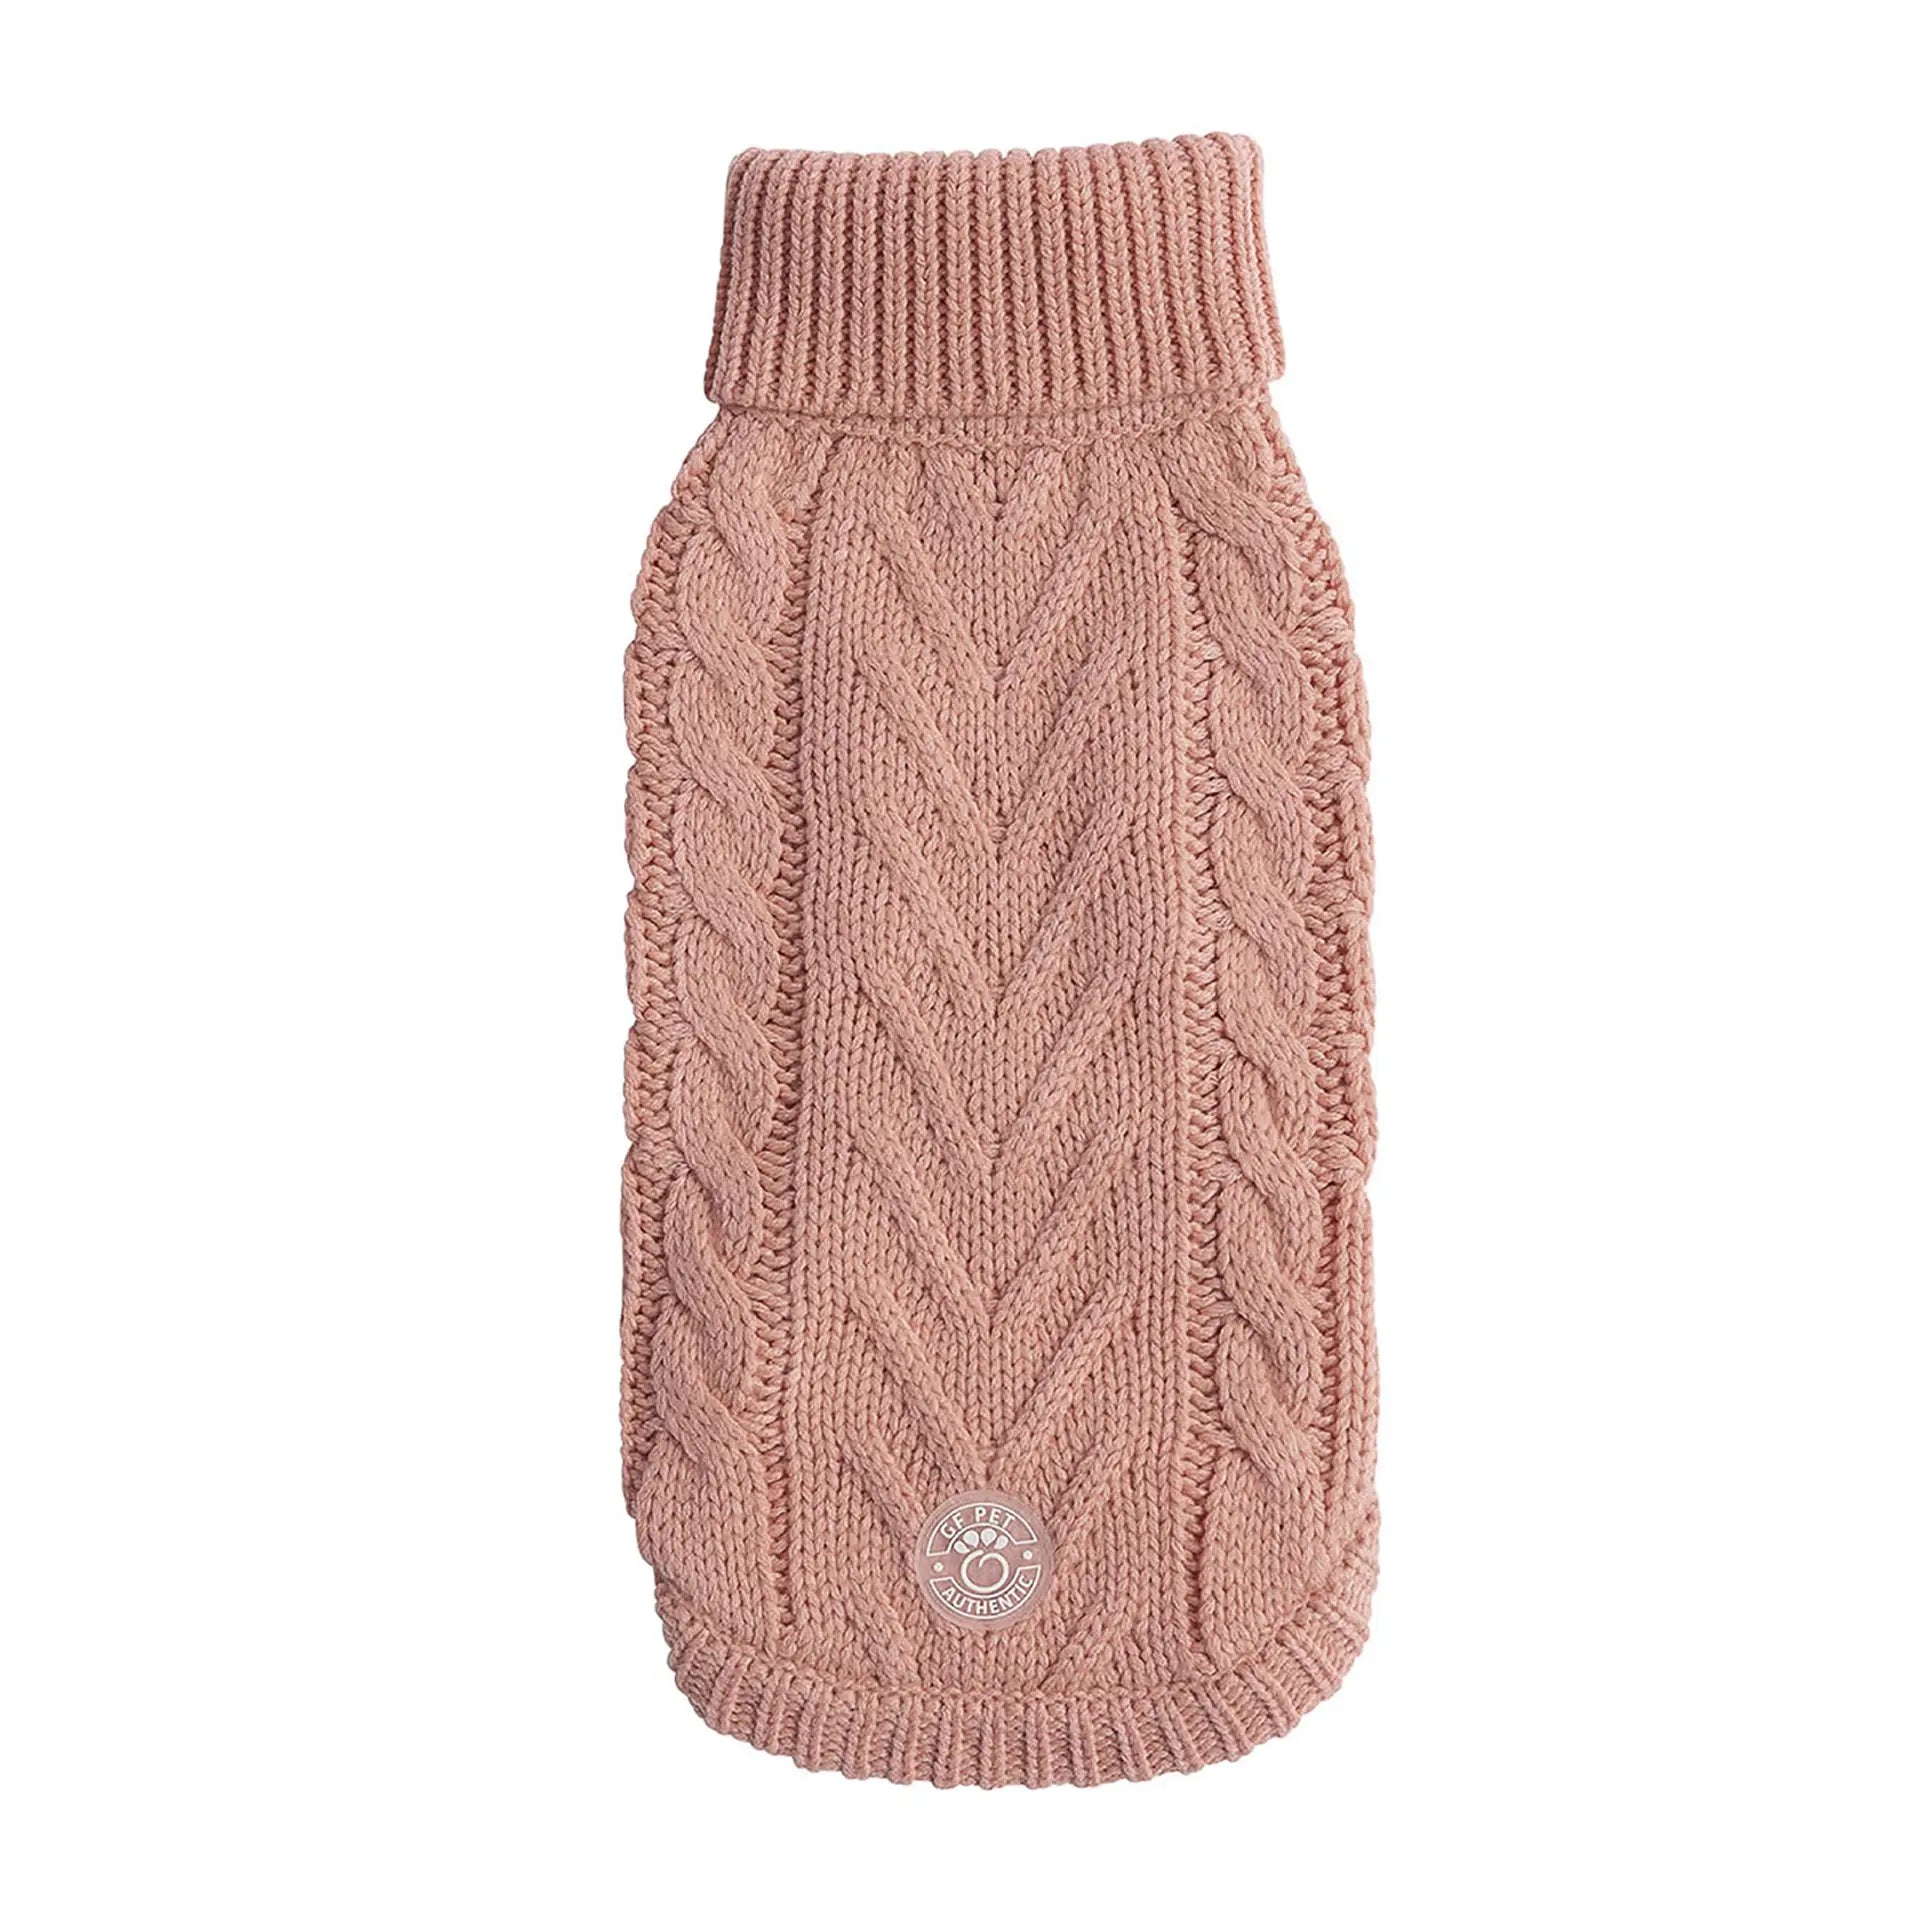 GF Pet Chalet Dog Pink Sweater available at  Adorable Pet Supply